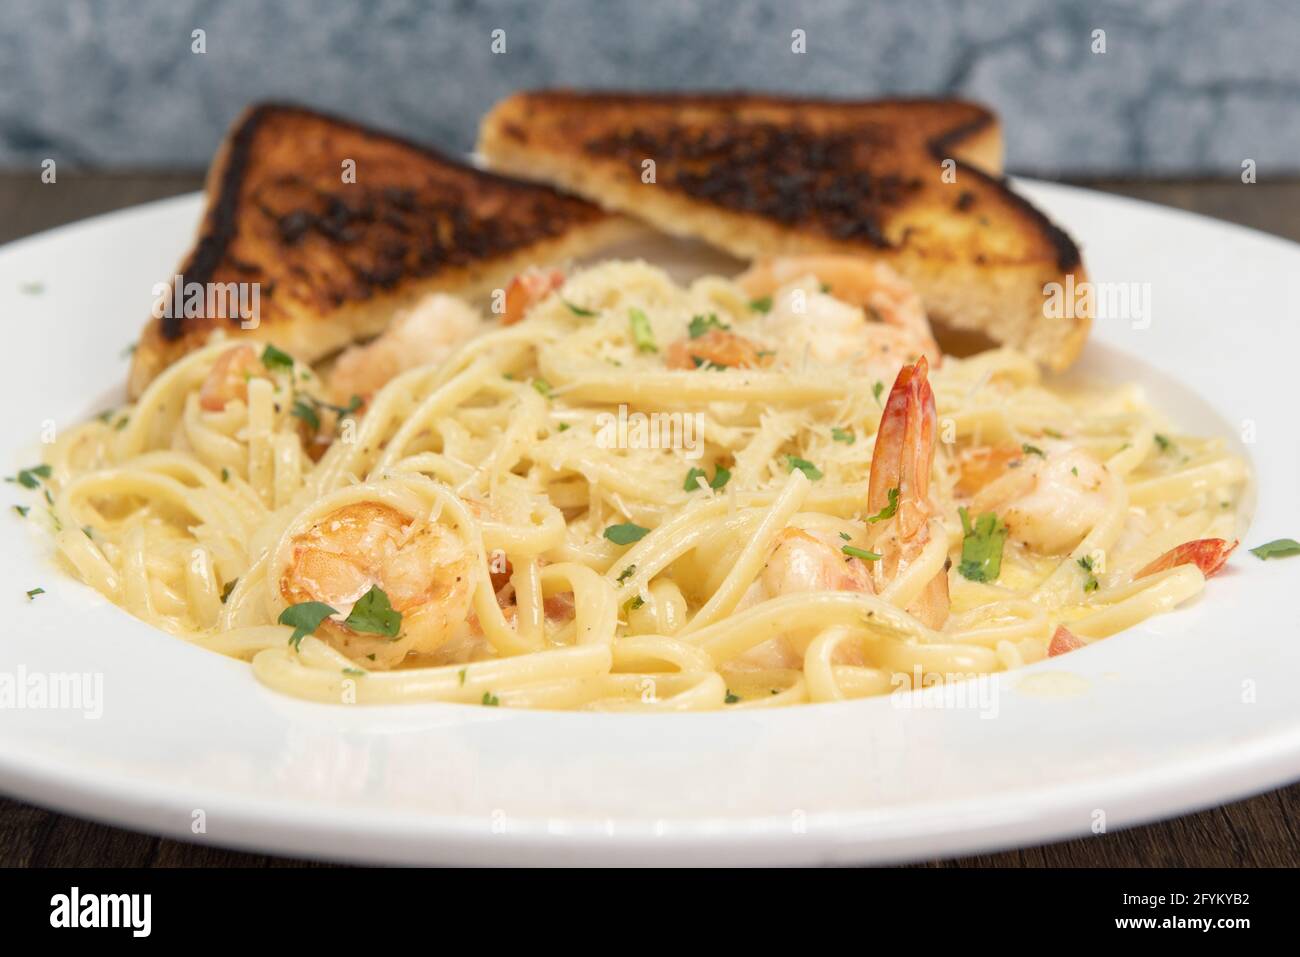 Shrimp scampi in buttery sauces and pasta served on a plate with grilled toast for a hearty appetite. Stock Photo